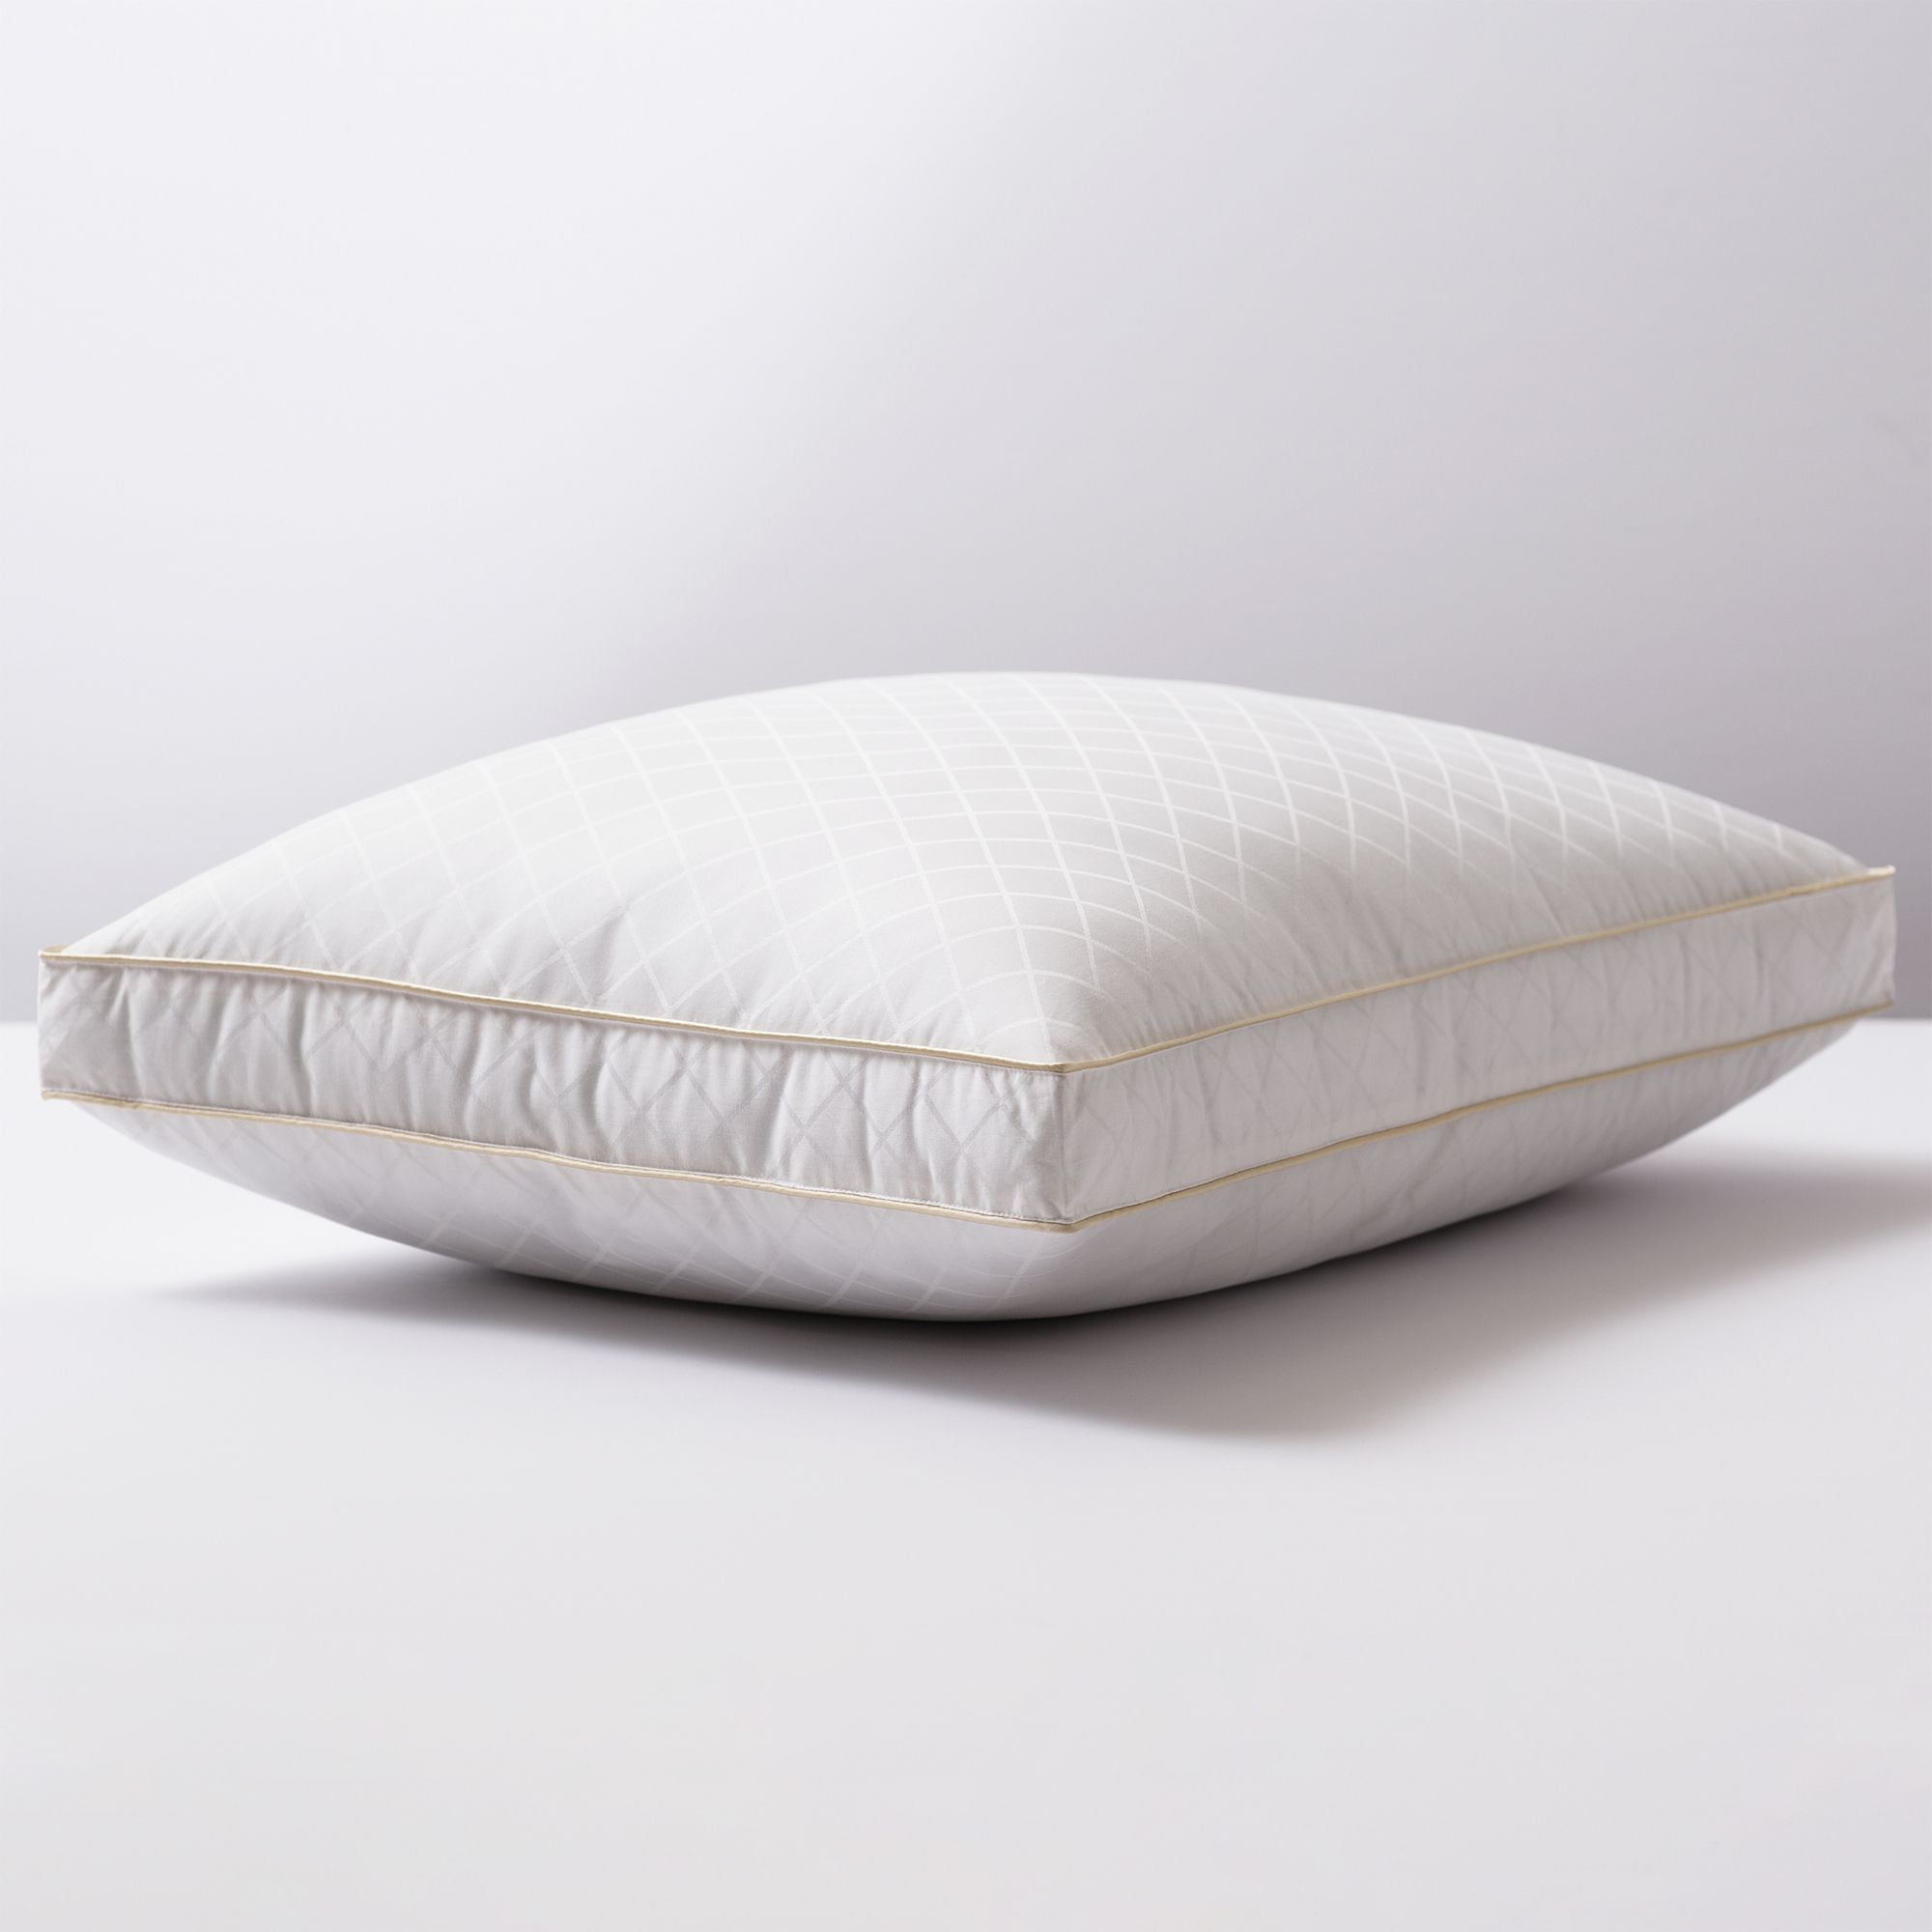 CosmoLiving Diamond Luxe Gusset Pillow, White, Standard